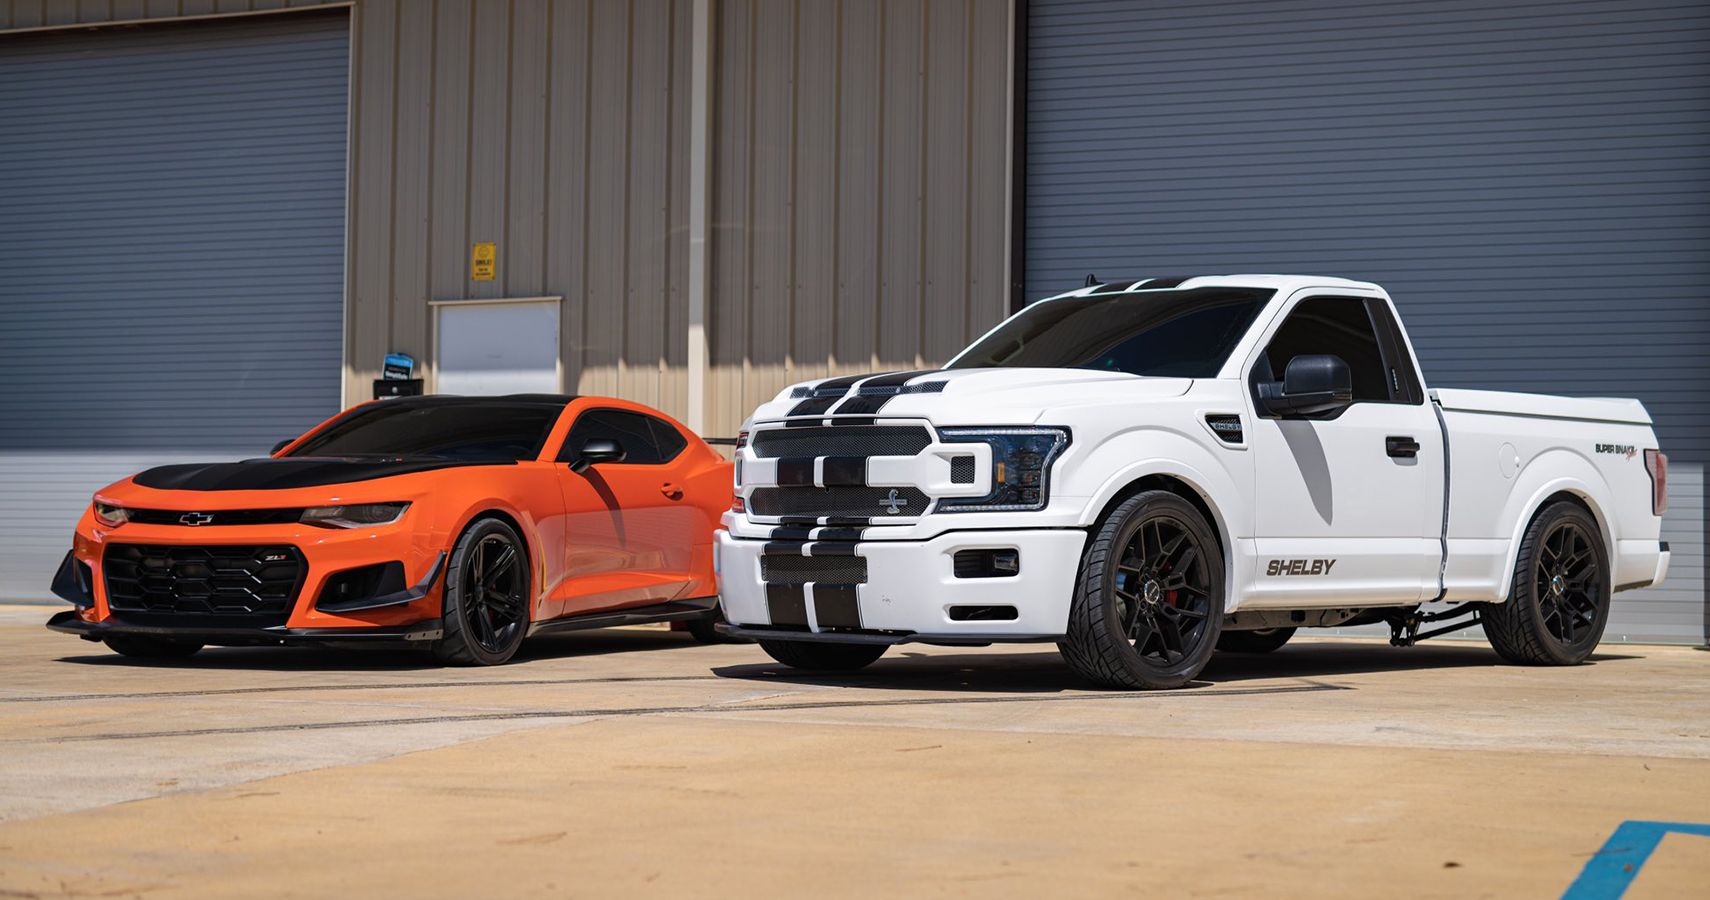 Camaro ZL1 and Ford Shelby F-150